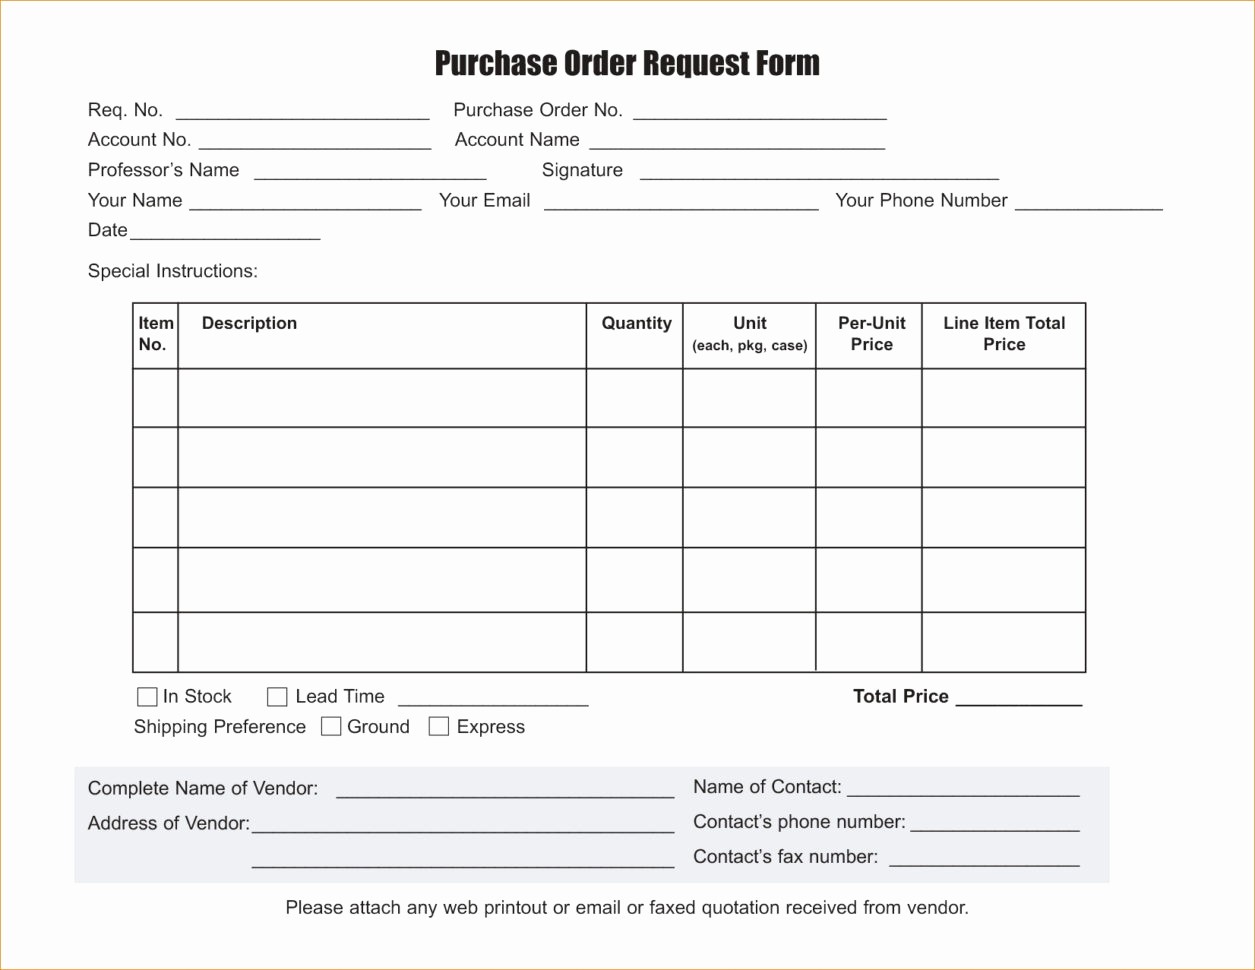 Purchase order Tracking Excel Sheet Unique Purchase order Spreadsheet Spreadsheet softwar Purchase